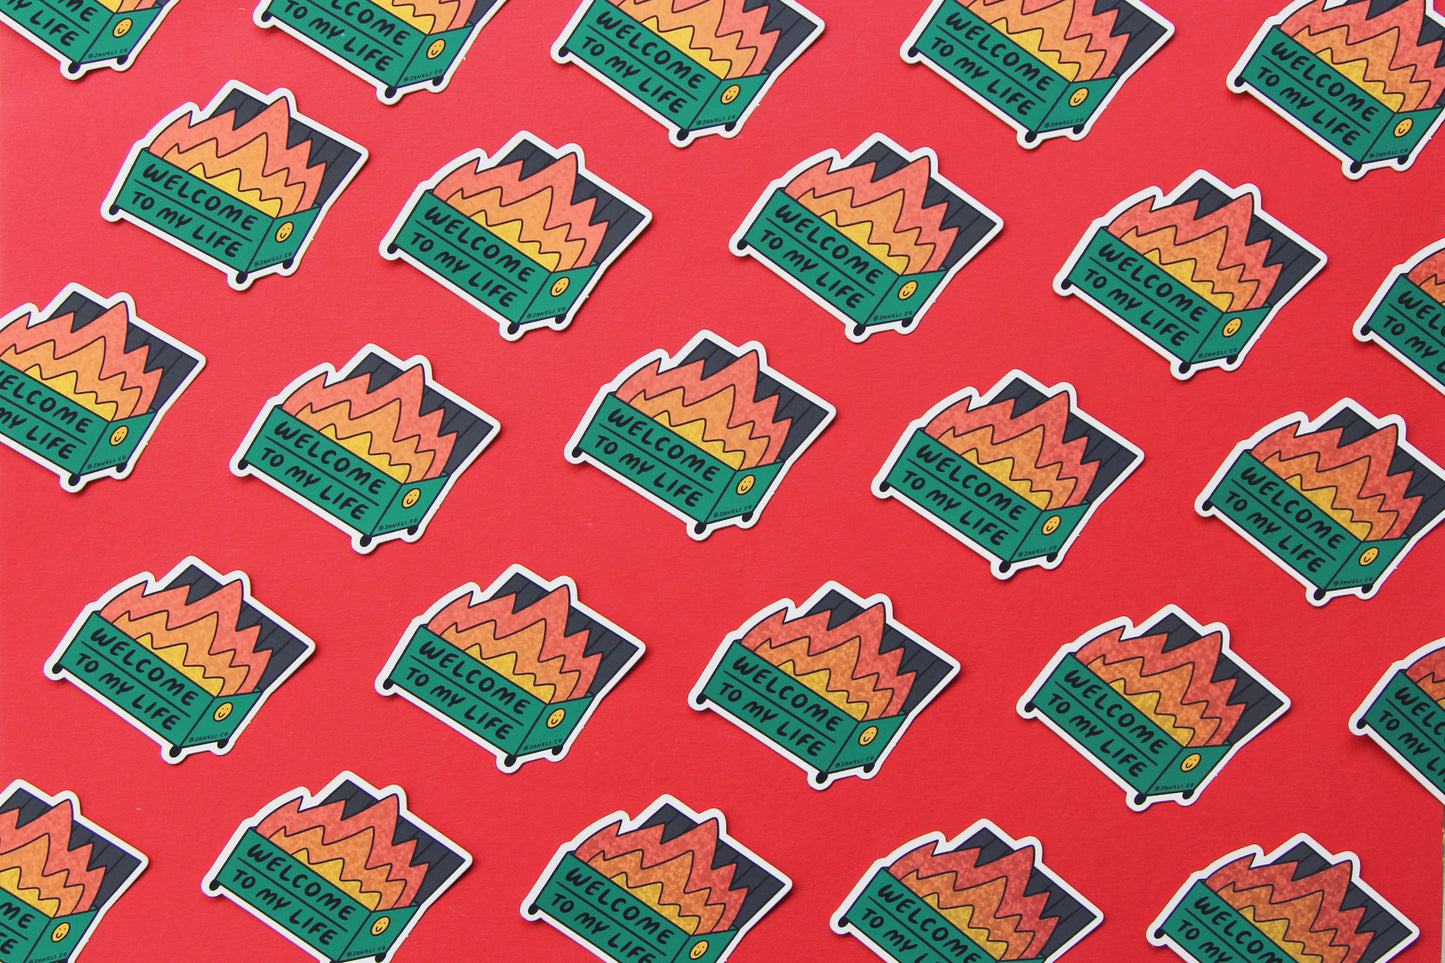 A grid of JaneLi.Co stickers that say "Welcome to my life" in the shape of a dumpster on fire over a red background.